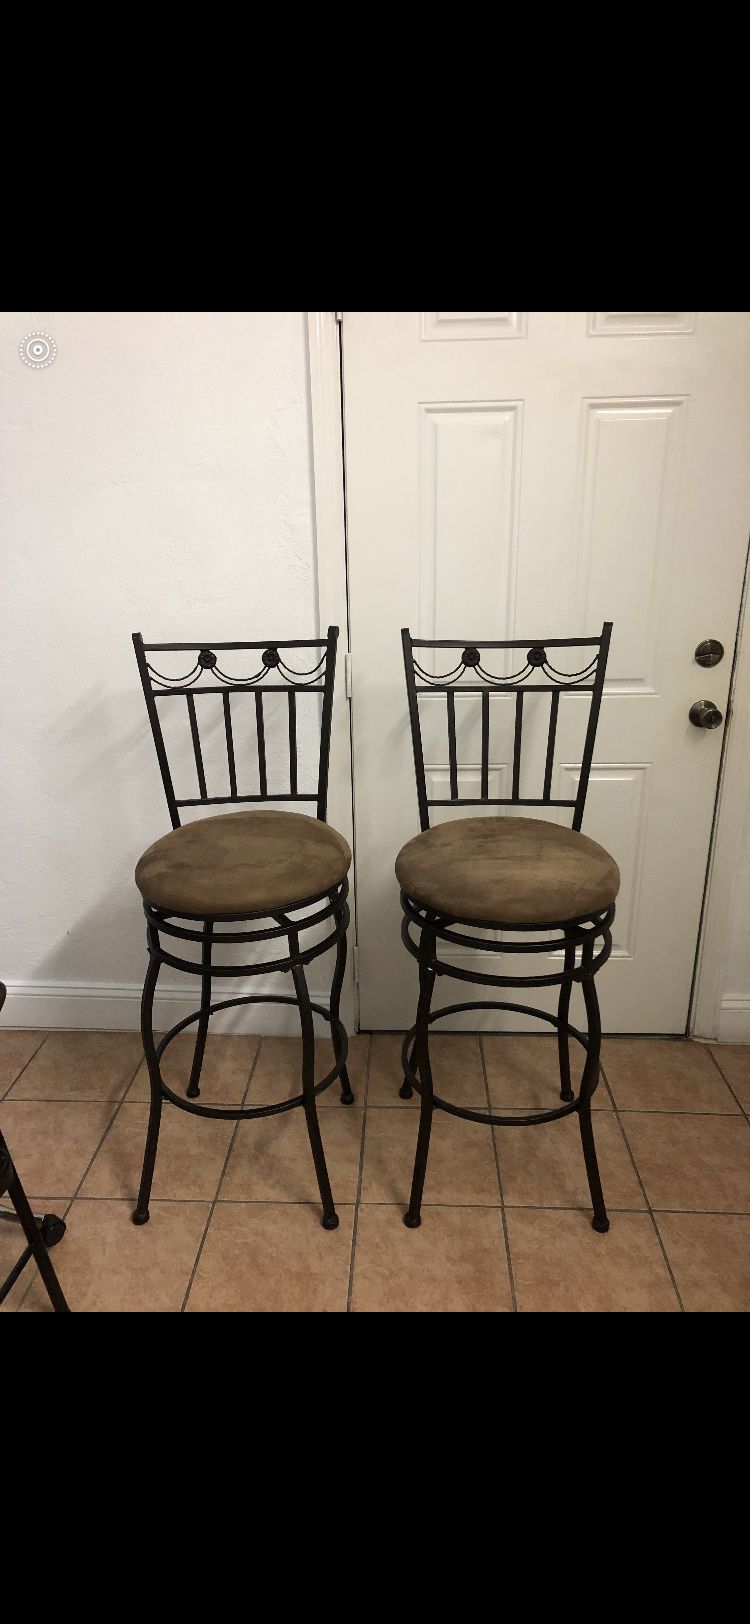 Two stools for a counter or a bar